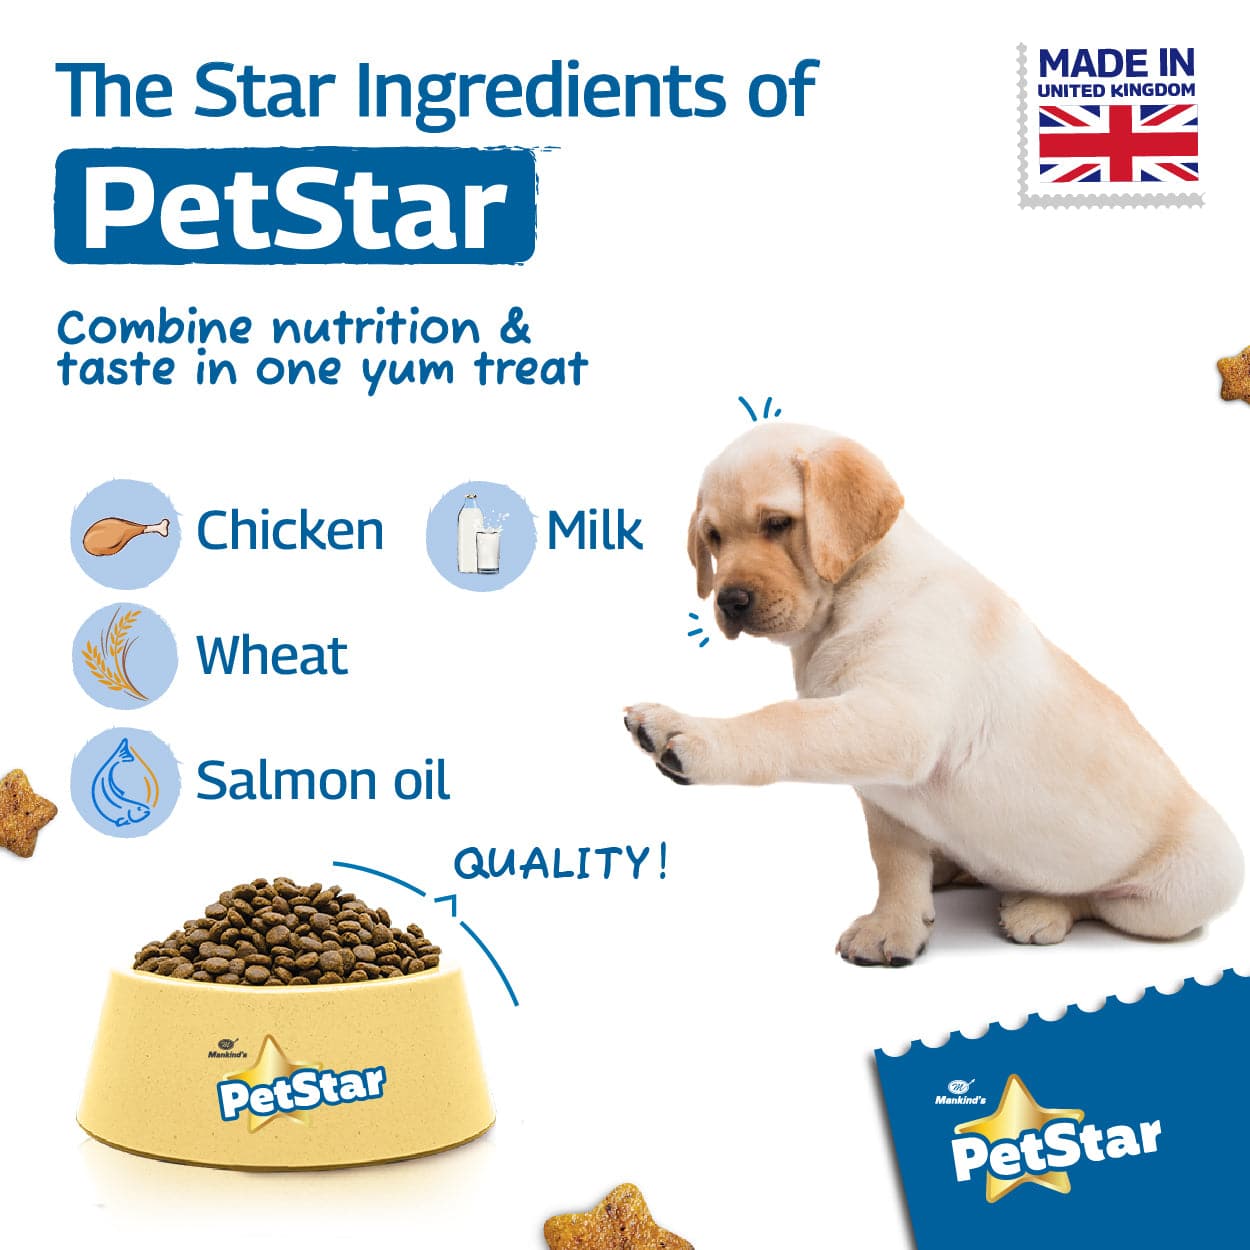 Mankind Petstar Milk and Wheat Dry Food (BOGO) and SmartHeart Chicken Chunks in Gravy Wet Food for Puppies Combo